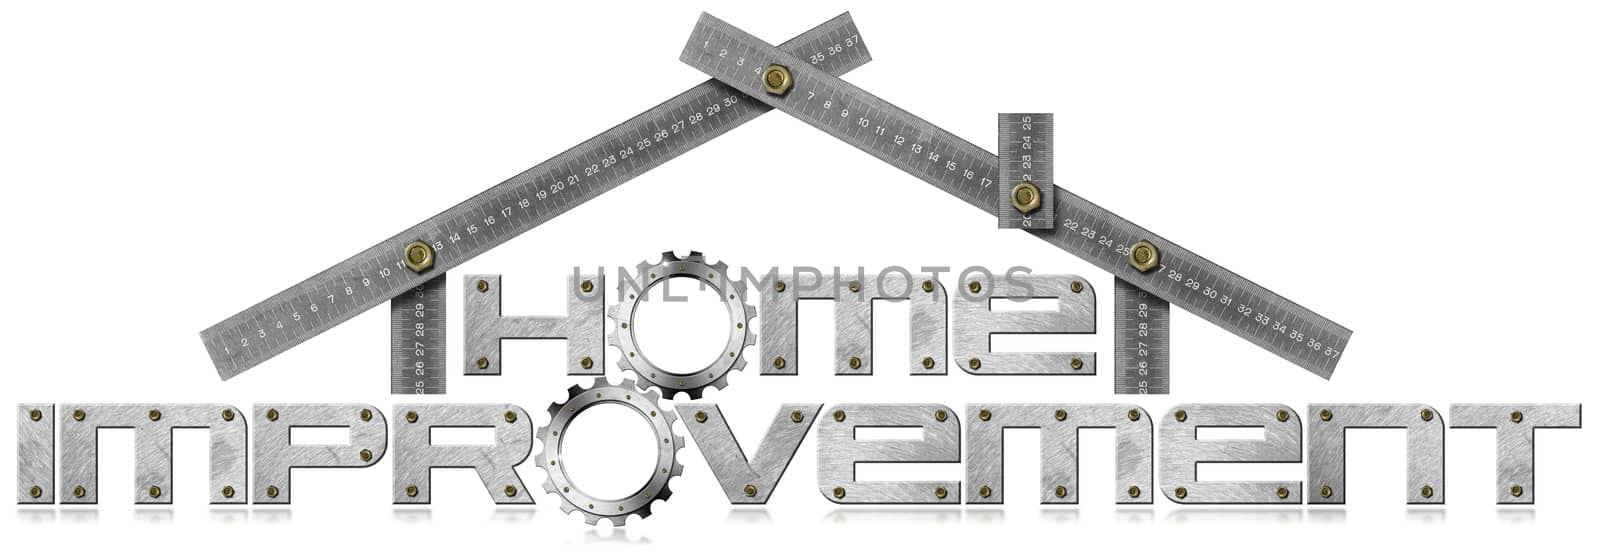 Metal symbol with text Home Improvement, metal gears and metal meter ruler in the shape of house. Isolated on white background